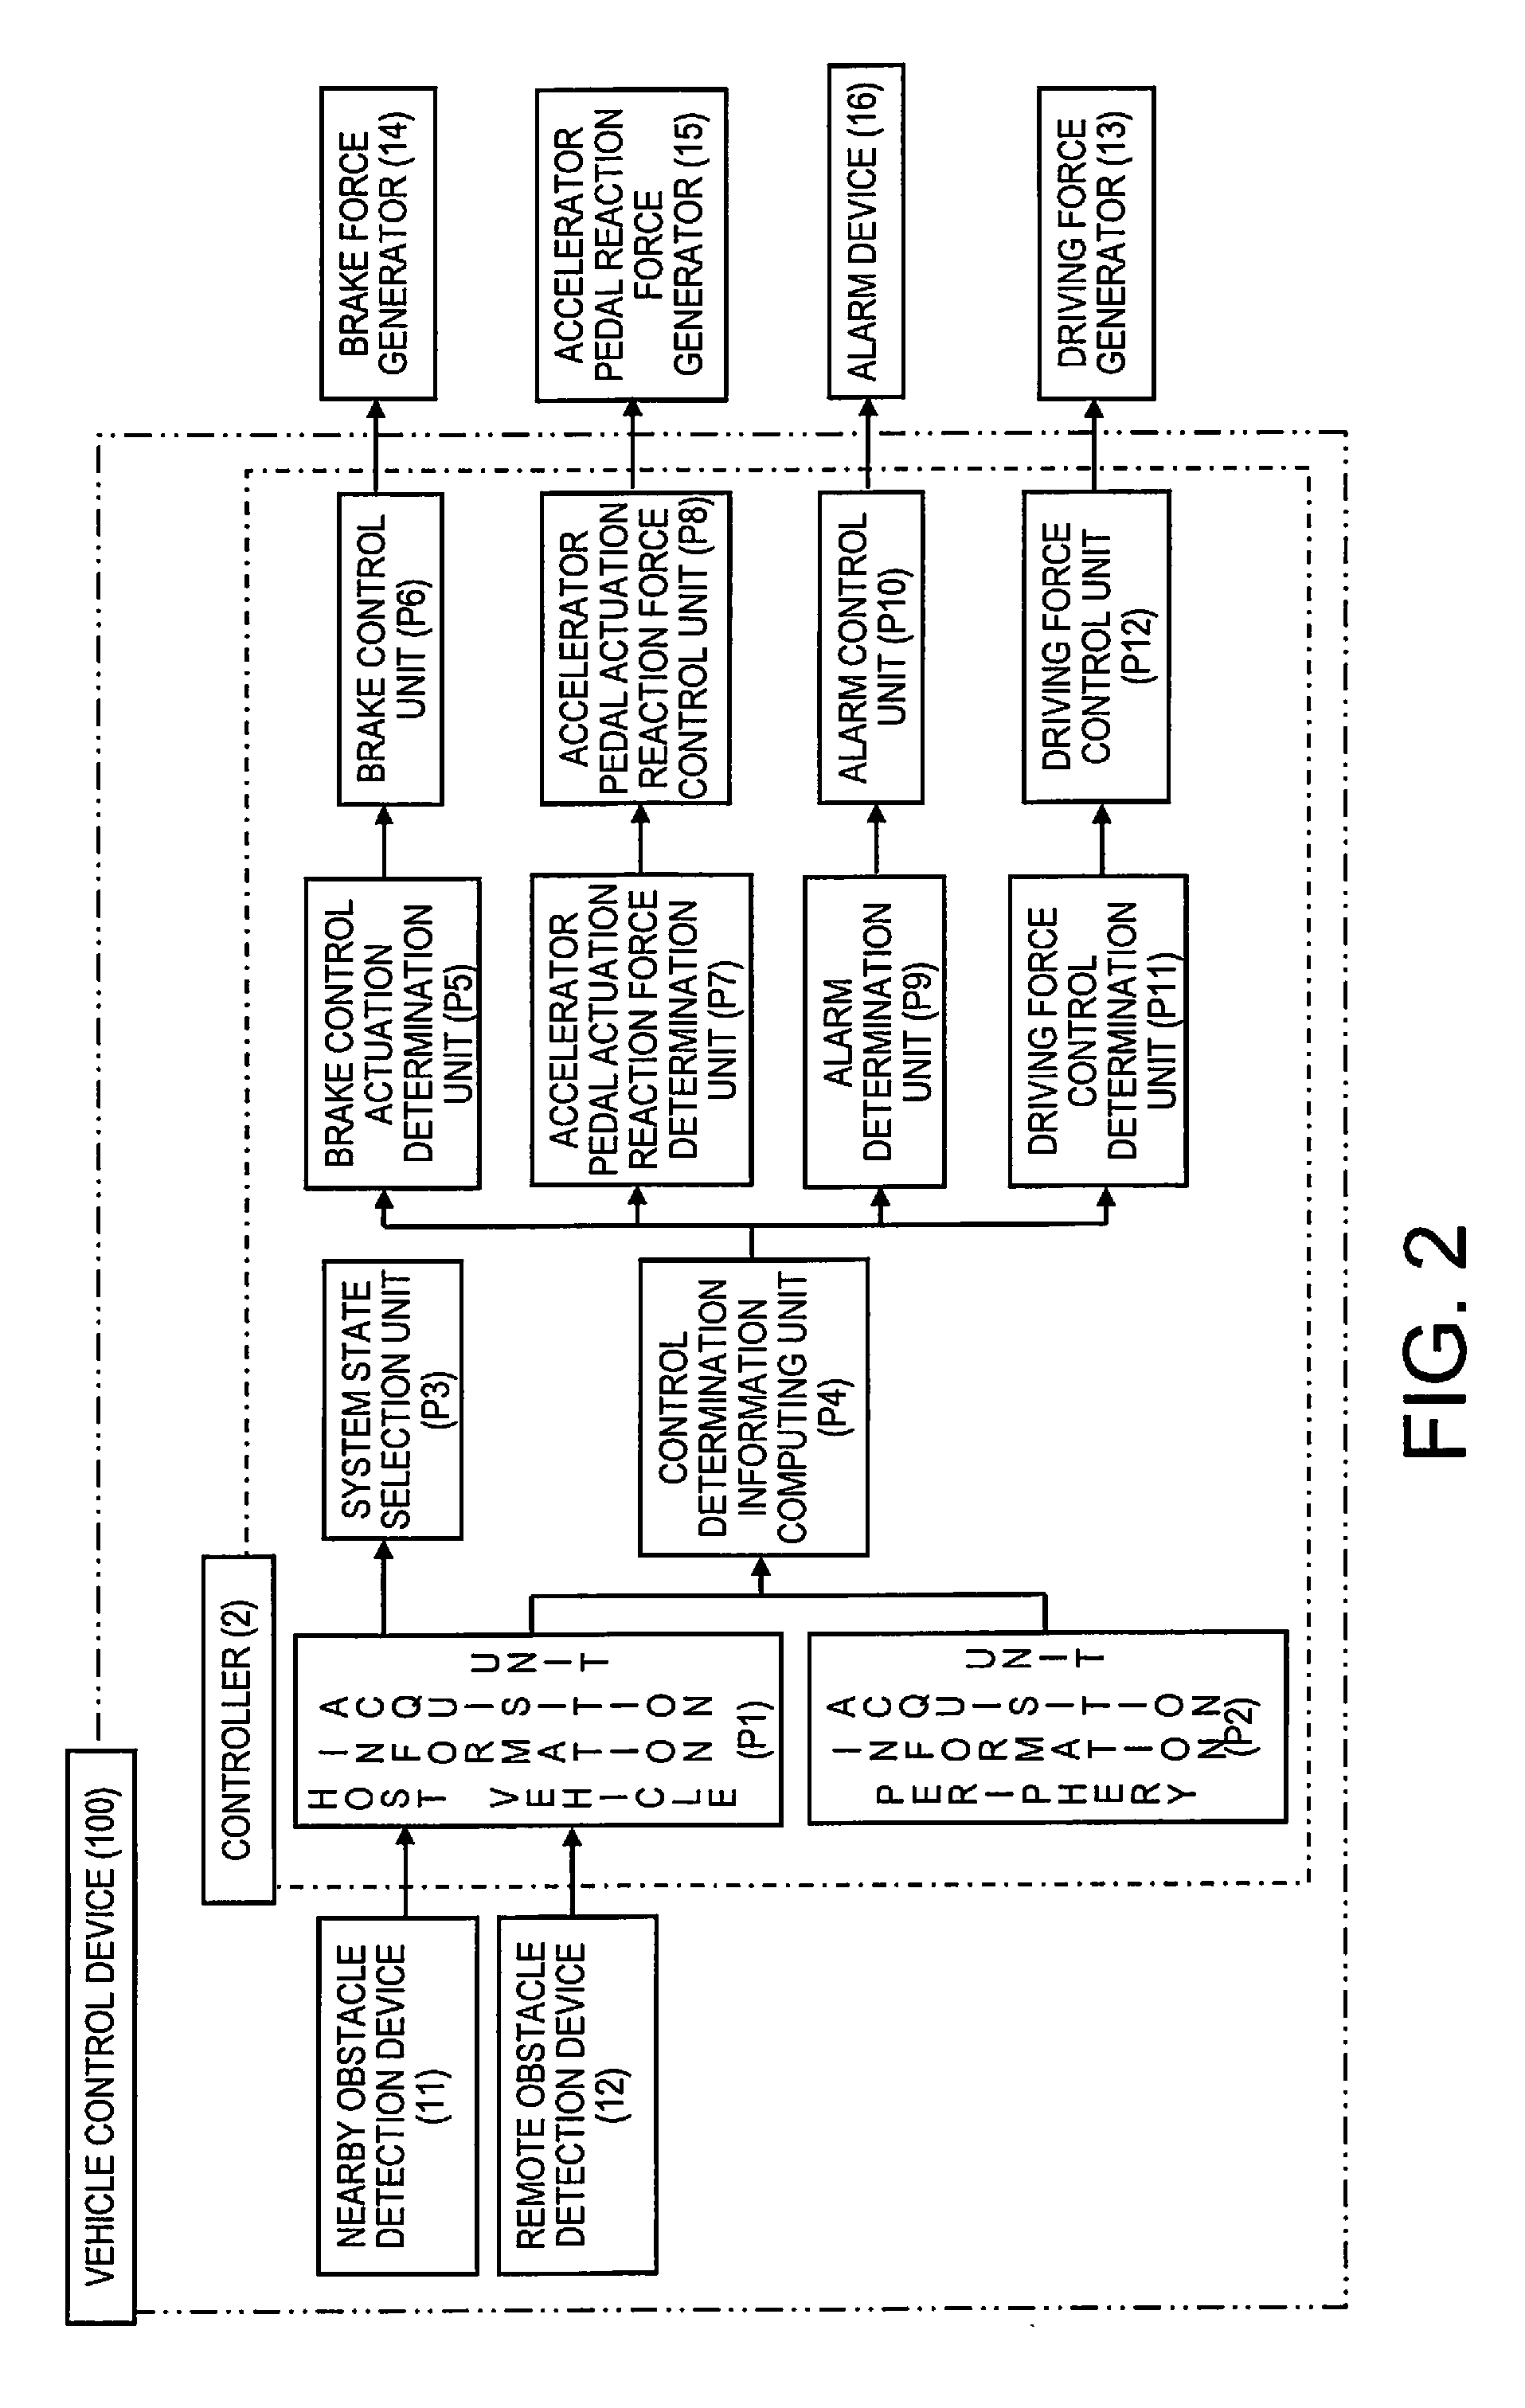 Vehicle control apparatus including an obstacle detection device